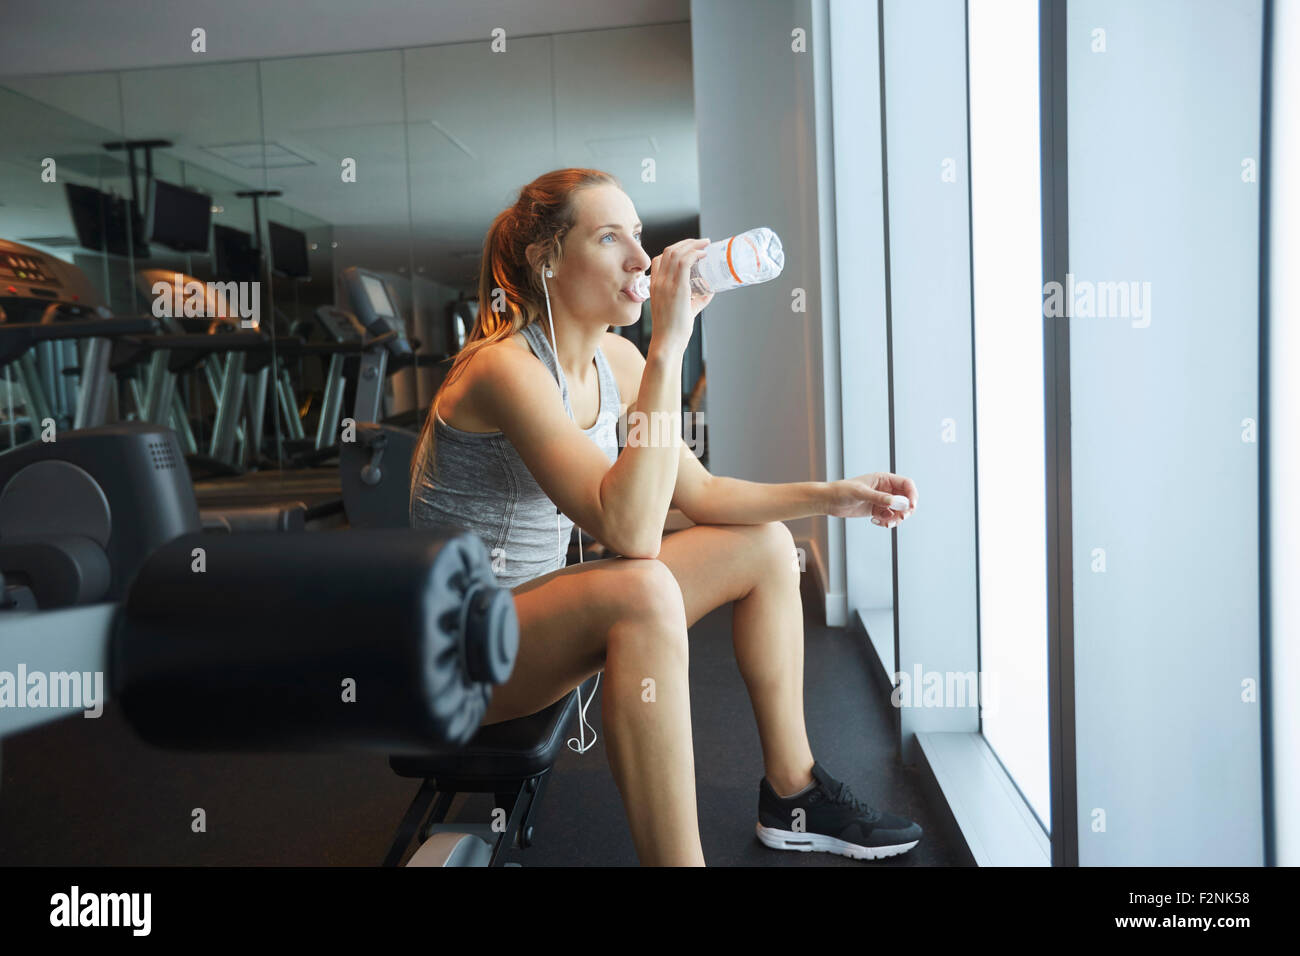 Woman drinking water bottle in gym Stock Photo